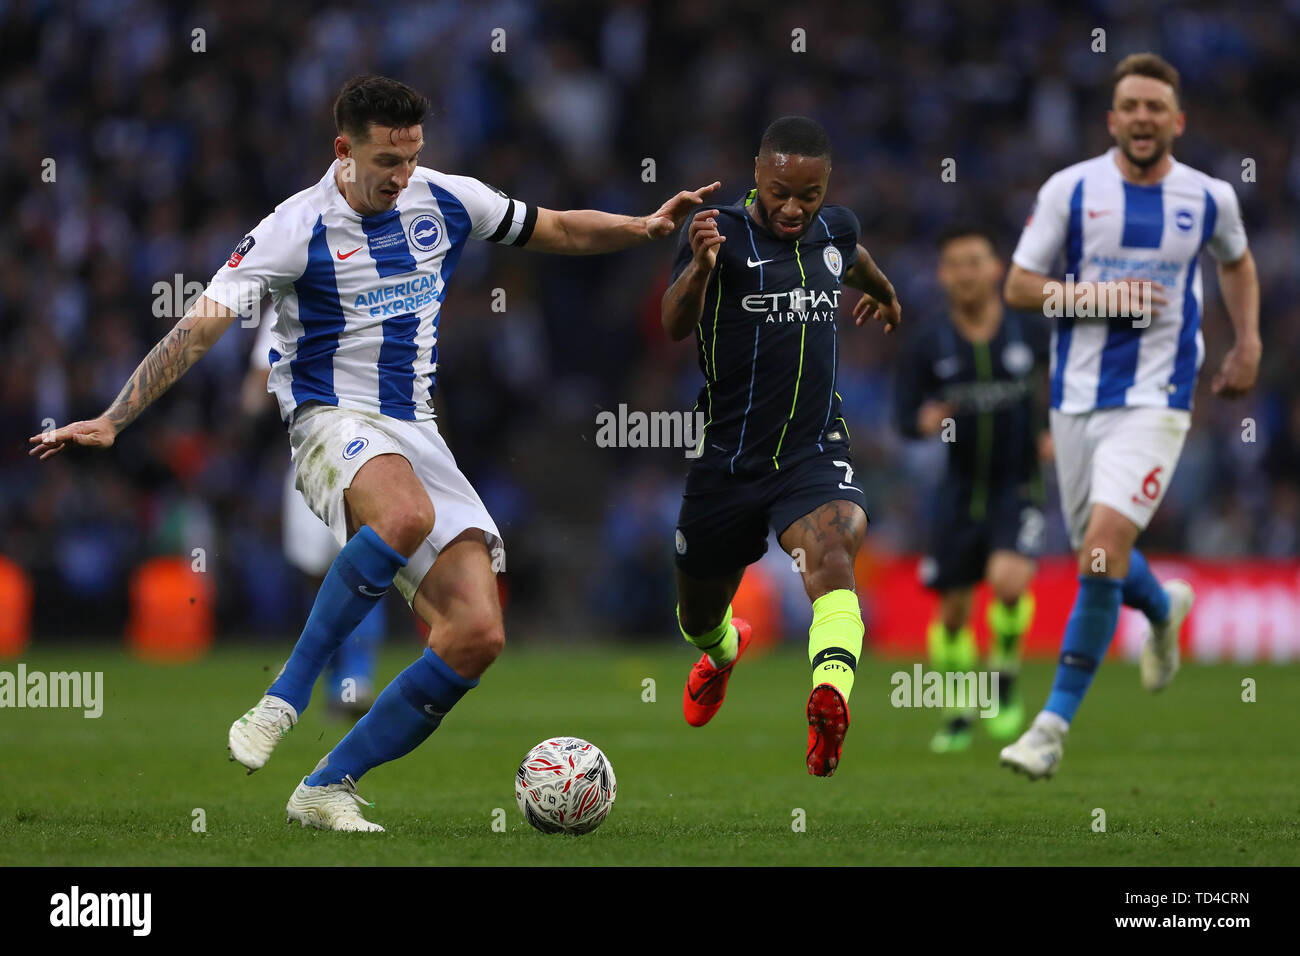 Raheem Sterling of Manchester City burst forward beating Lewis Dunk of Brighton & Hove Albion - Manchester City v Brighton & Hove Albion, The Emirates FA Cup Semi Final, Wembley Stadium, London - 6th April 2019  Editorial Use Only Stock Photo